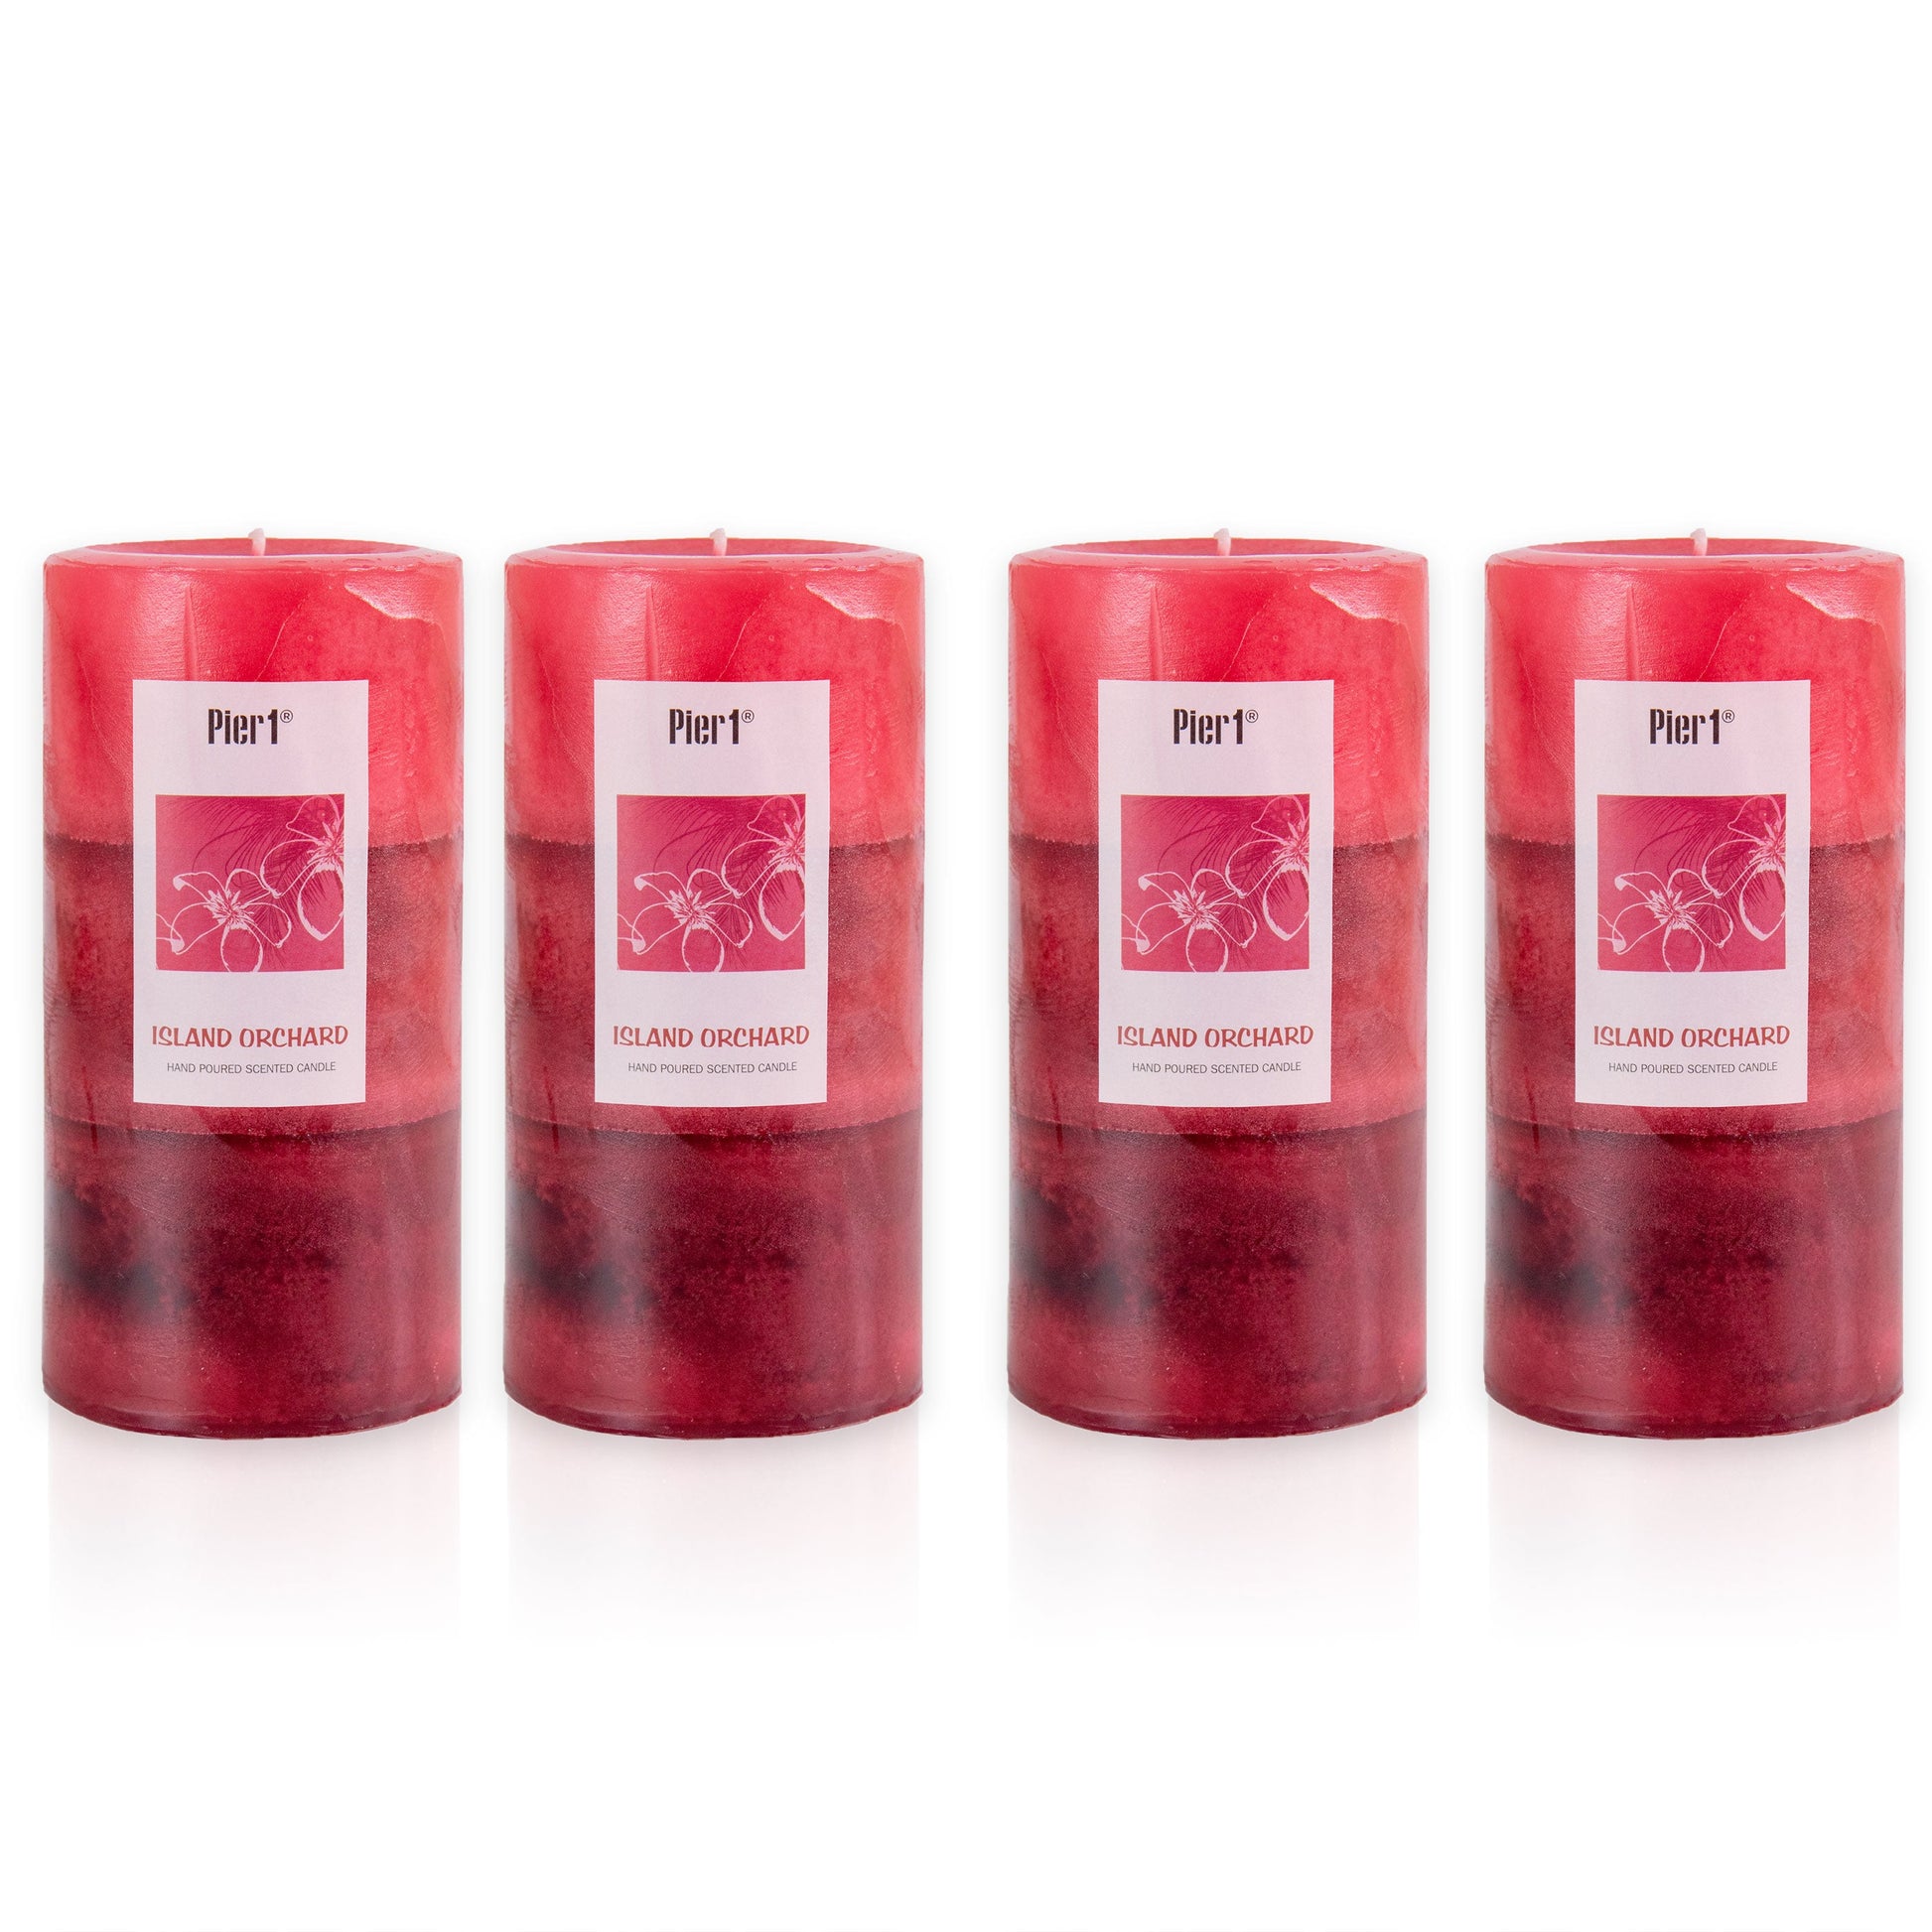 Pier 1 Island Orchard 3x6 Layered Set of 4 Pillar Candles - The Home Resolution